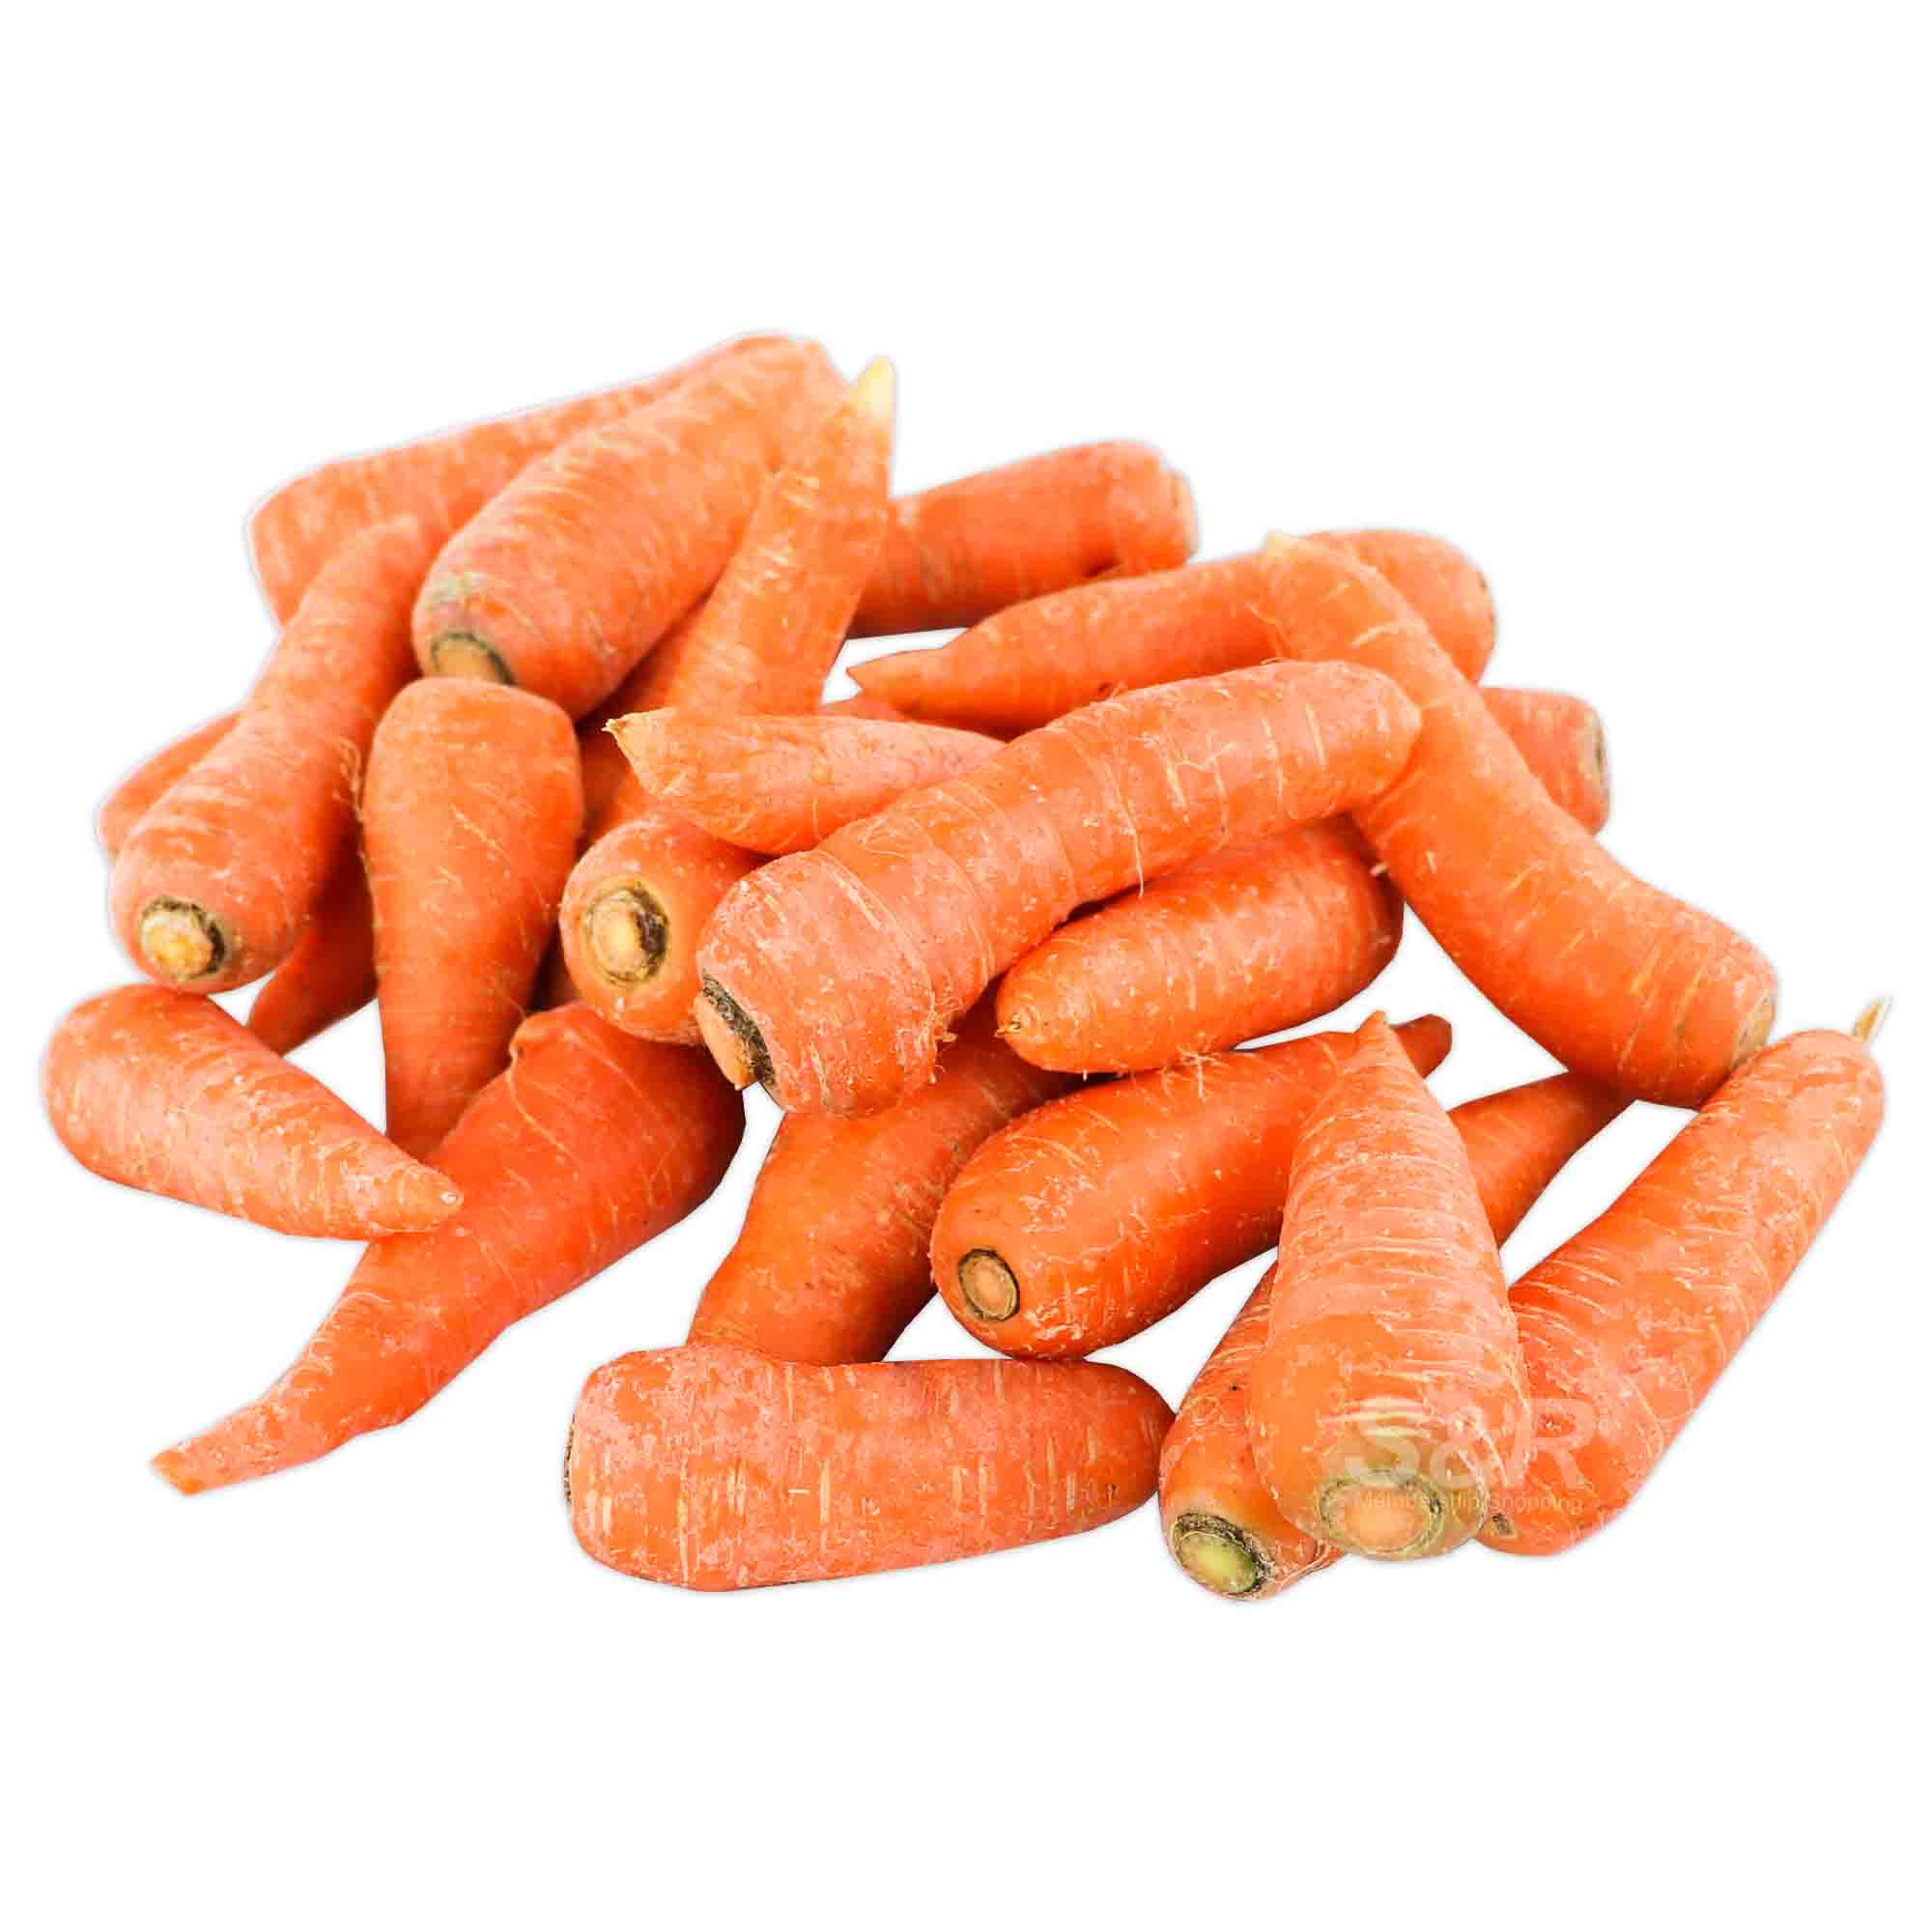 S&R Organic Baby Carrots approx. 800g